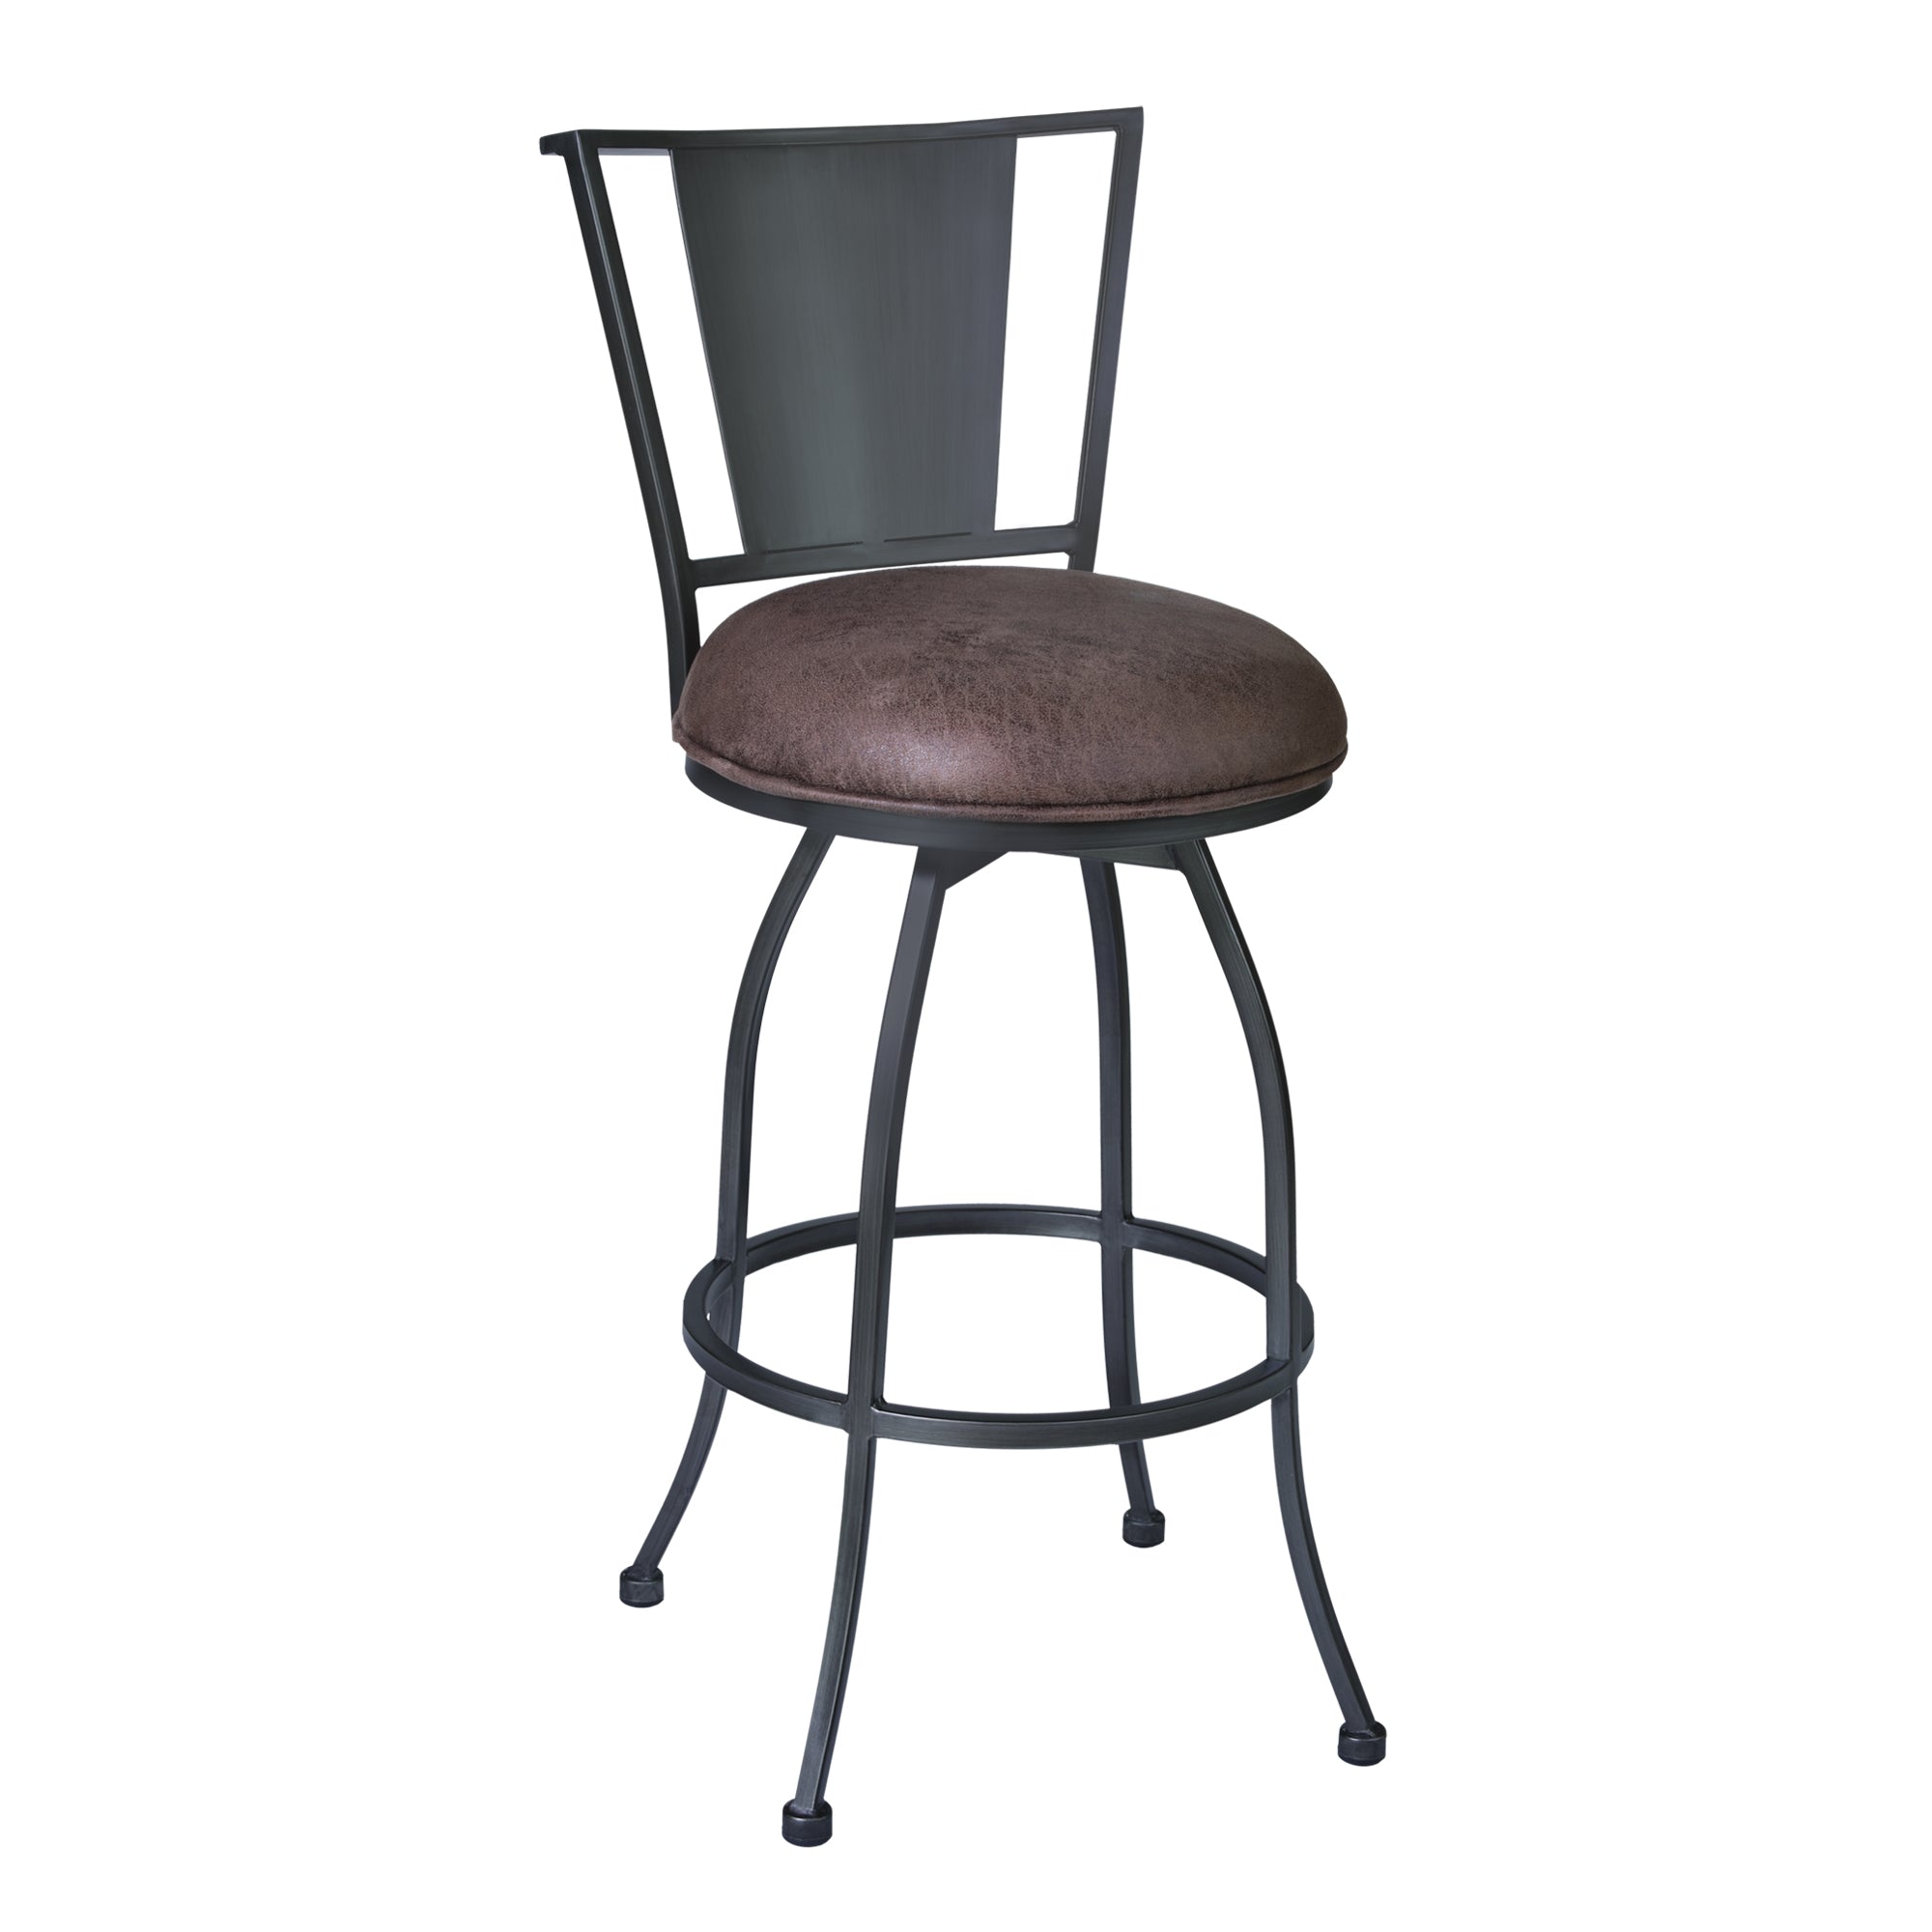 Armen Living LCDY26BATO Dynasty 26 Counter Height Barstool in Mineral finish with Bandero Tobacco